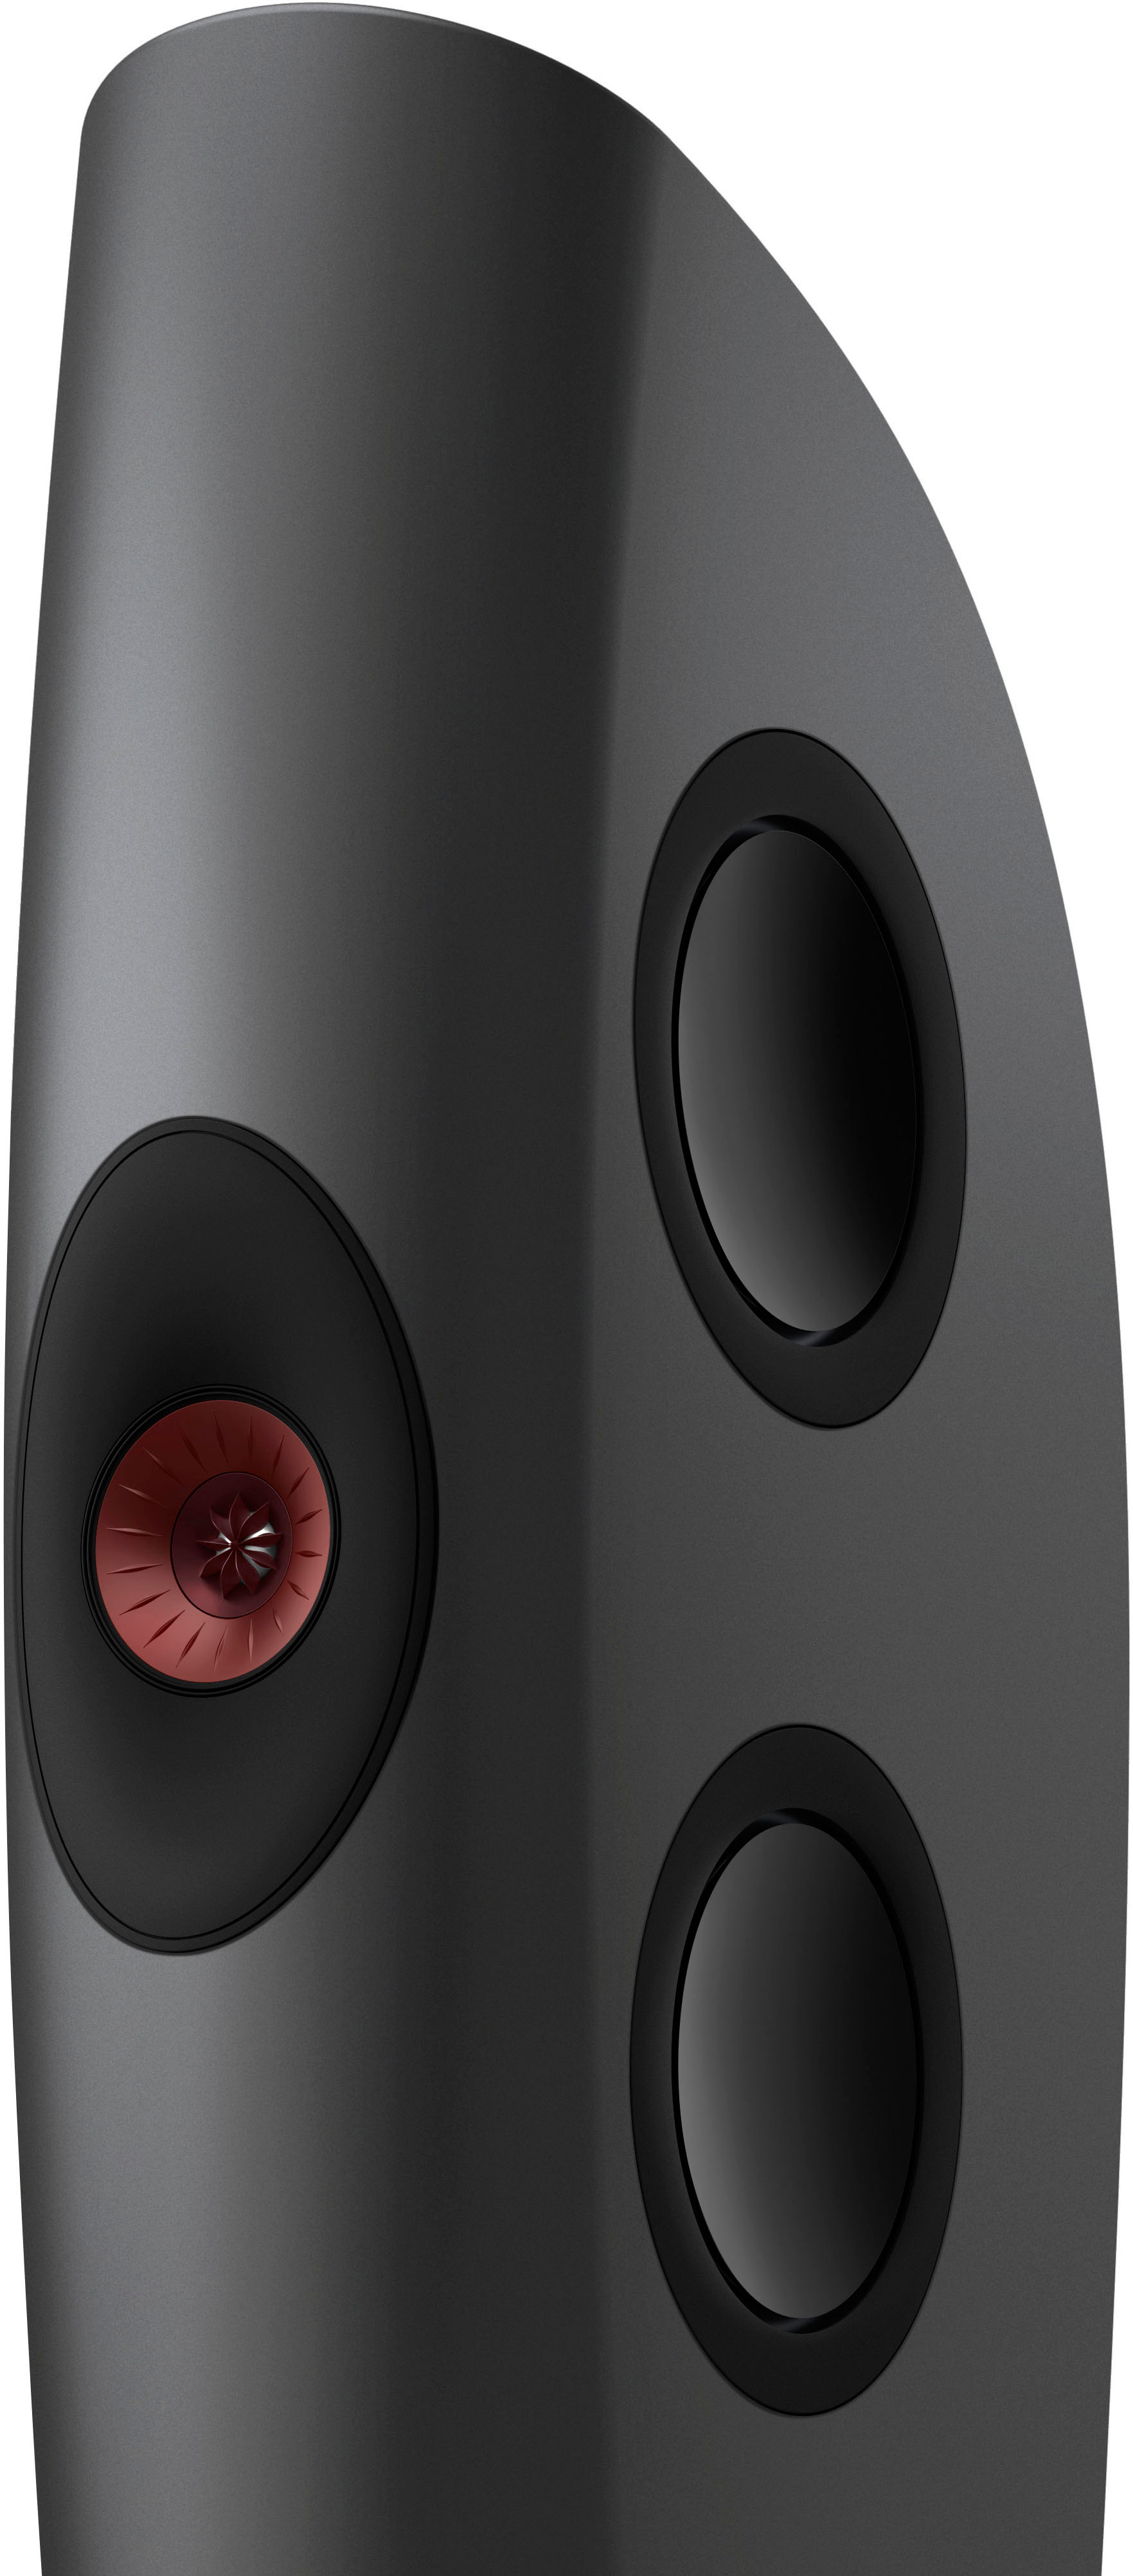 Angle View: KEF BLADE ONE META (EACH) - CHARCOAL GREY RED